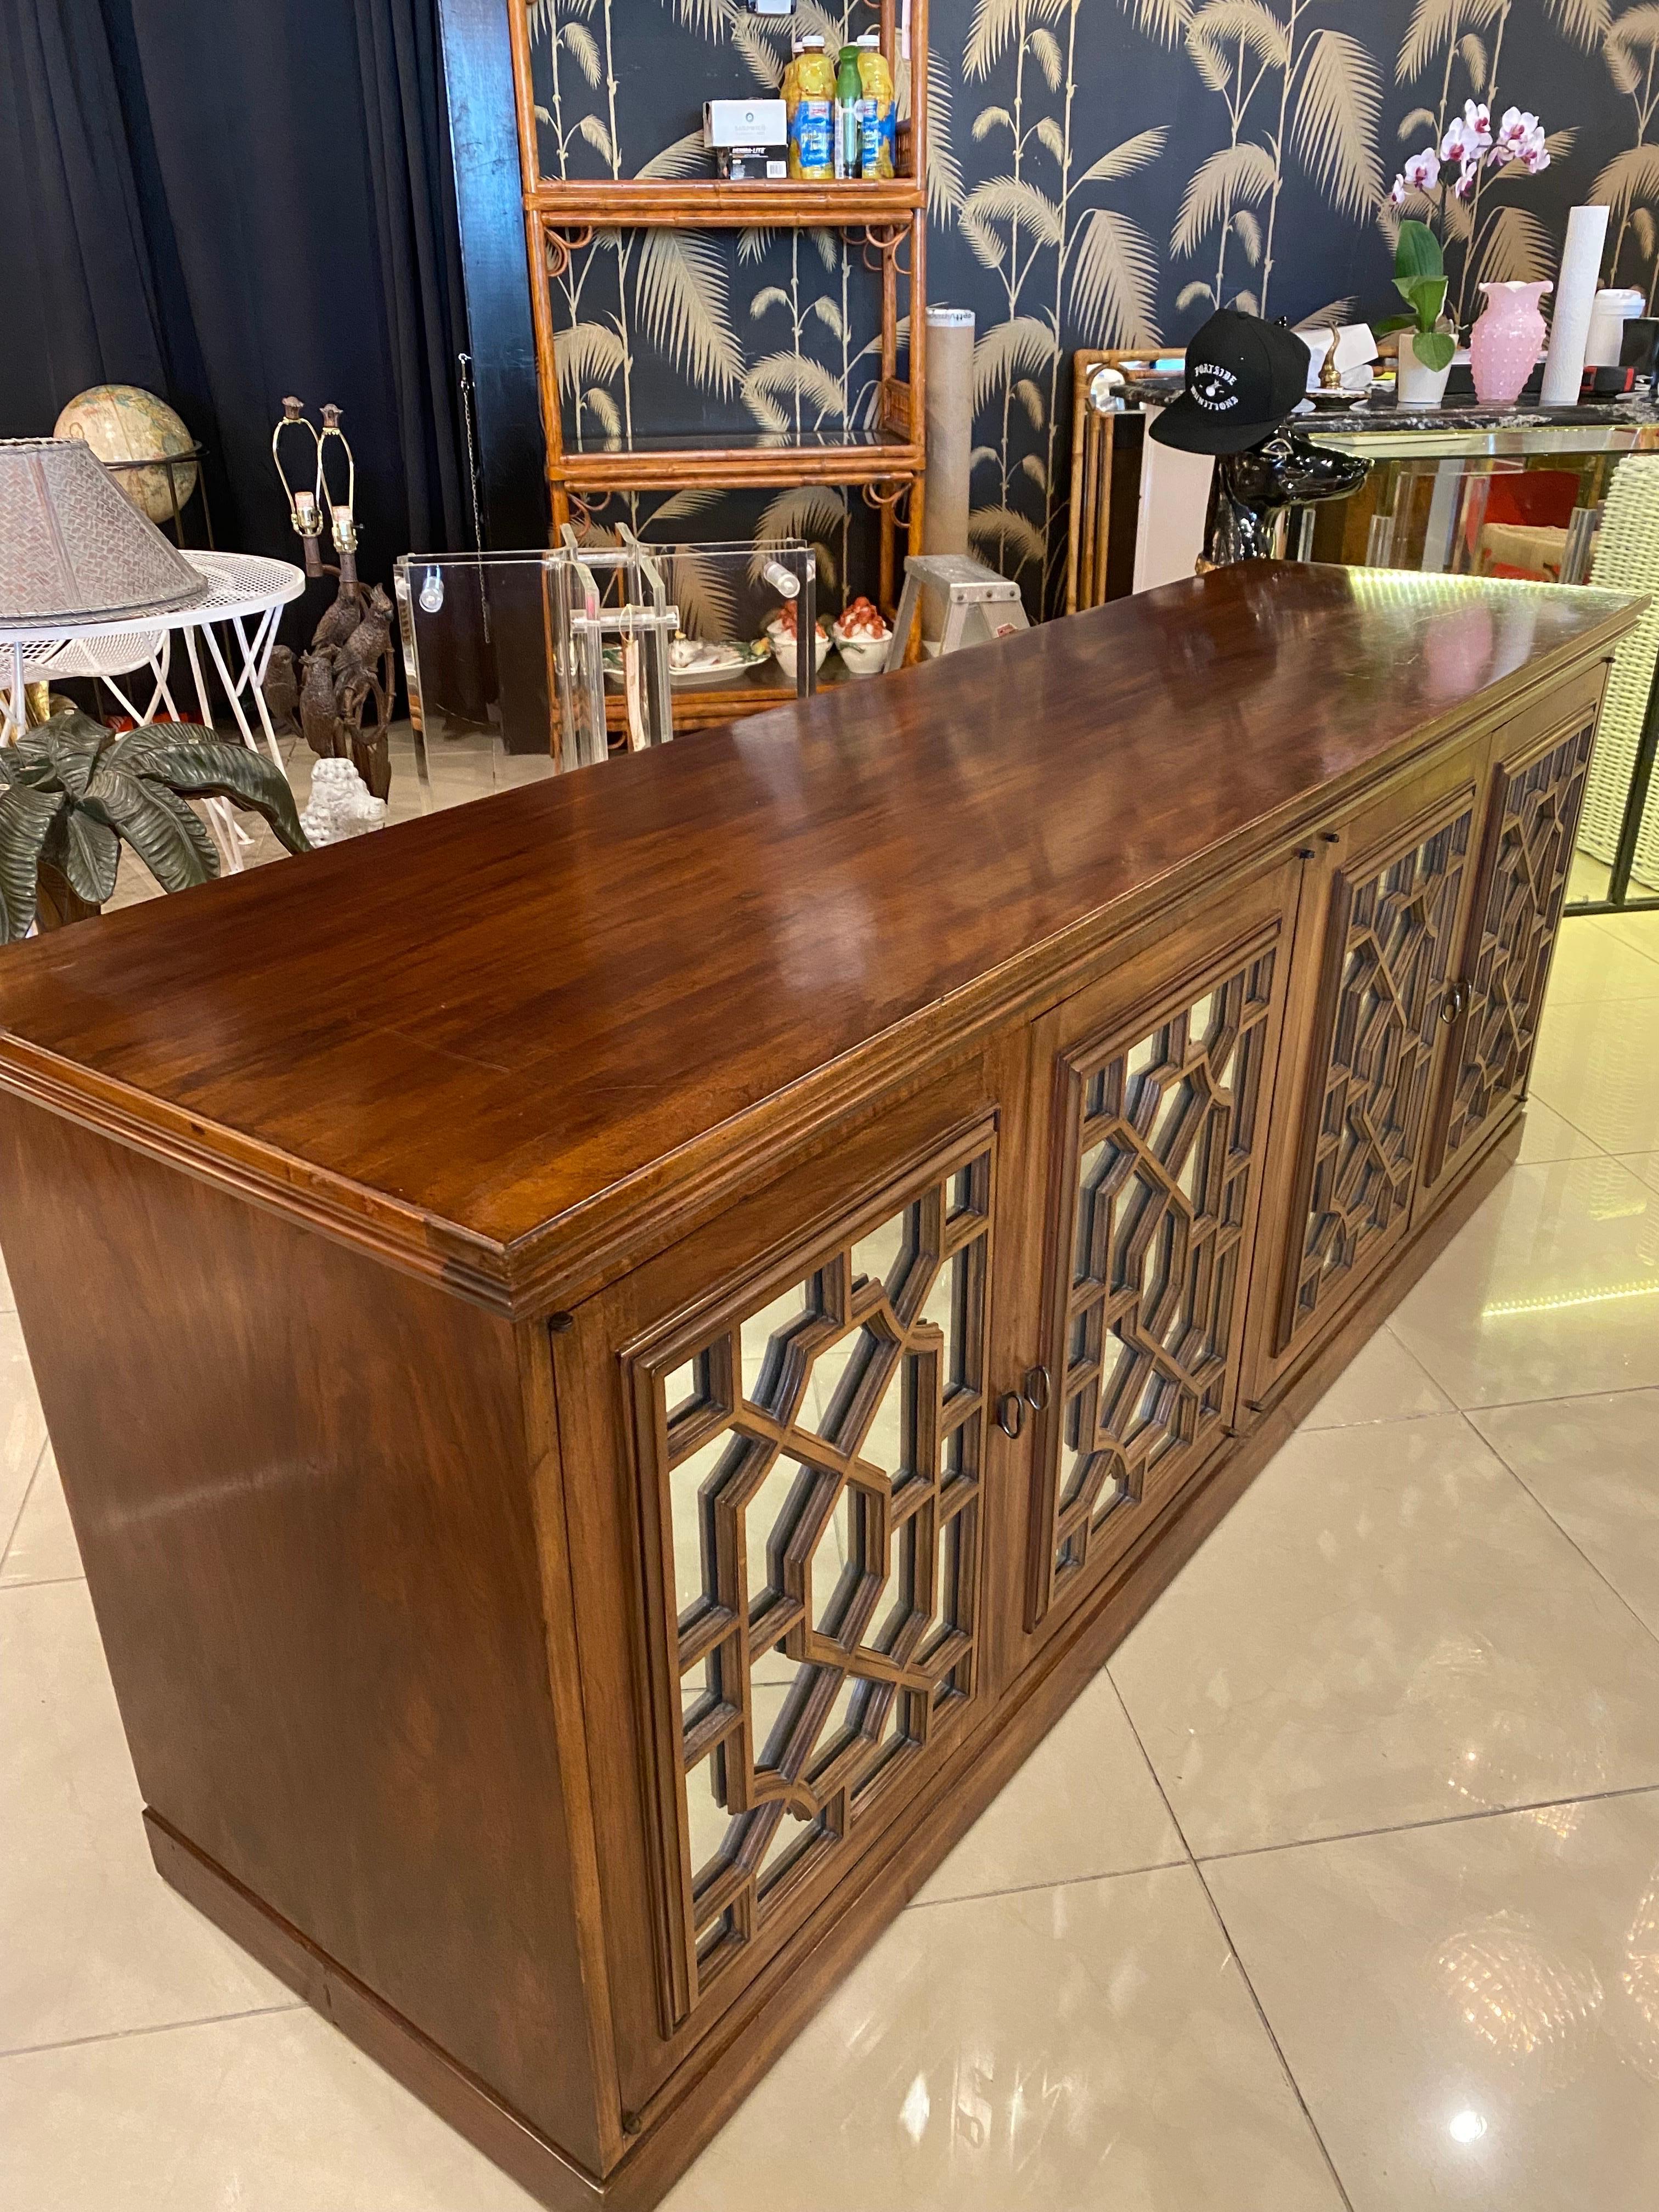 Vintage Wood Chinoiserie Fretwork Fret Mirrored Credenza Buffet Sideboard Doors In Good Condition For Sale In West Palm Beach, FL